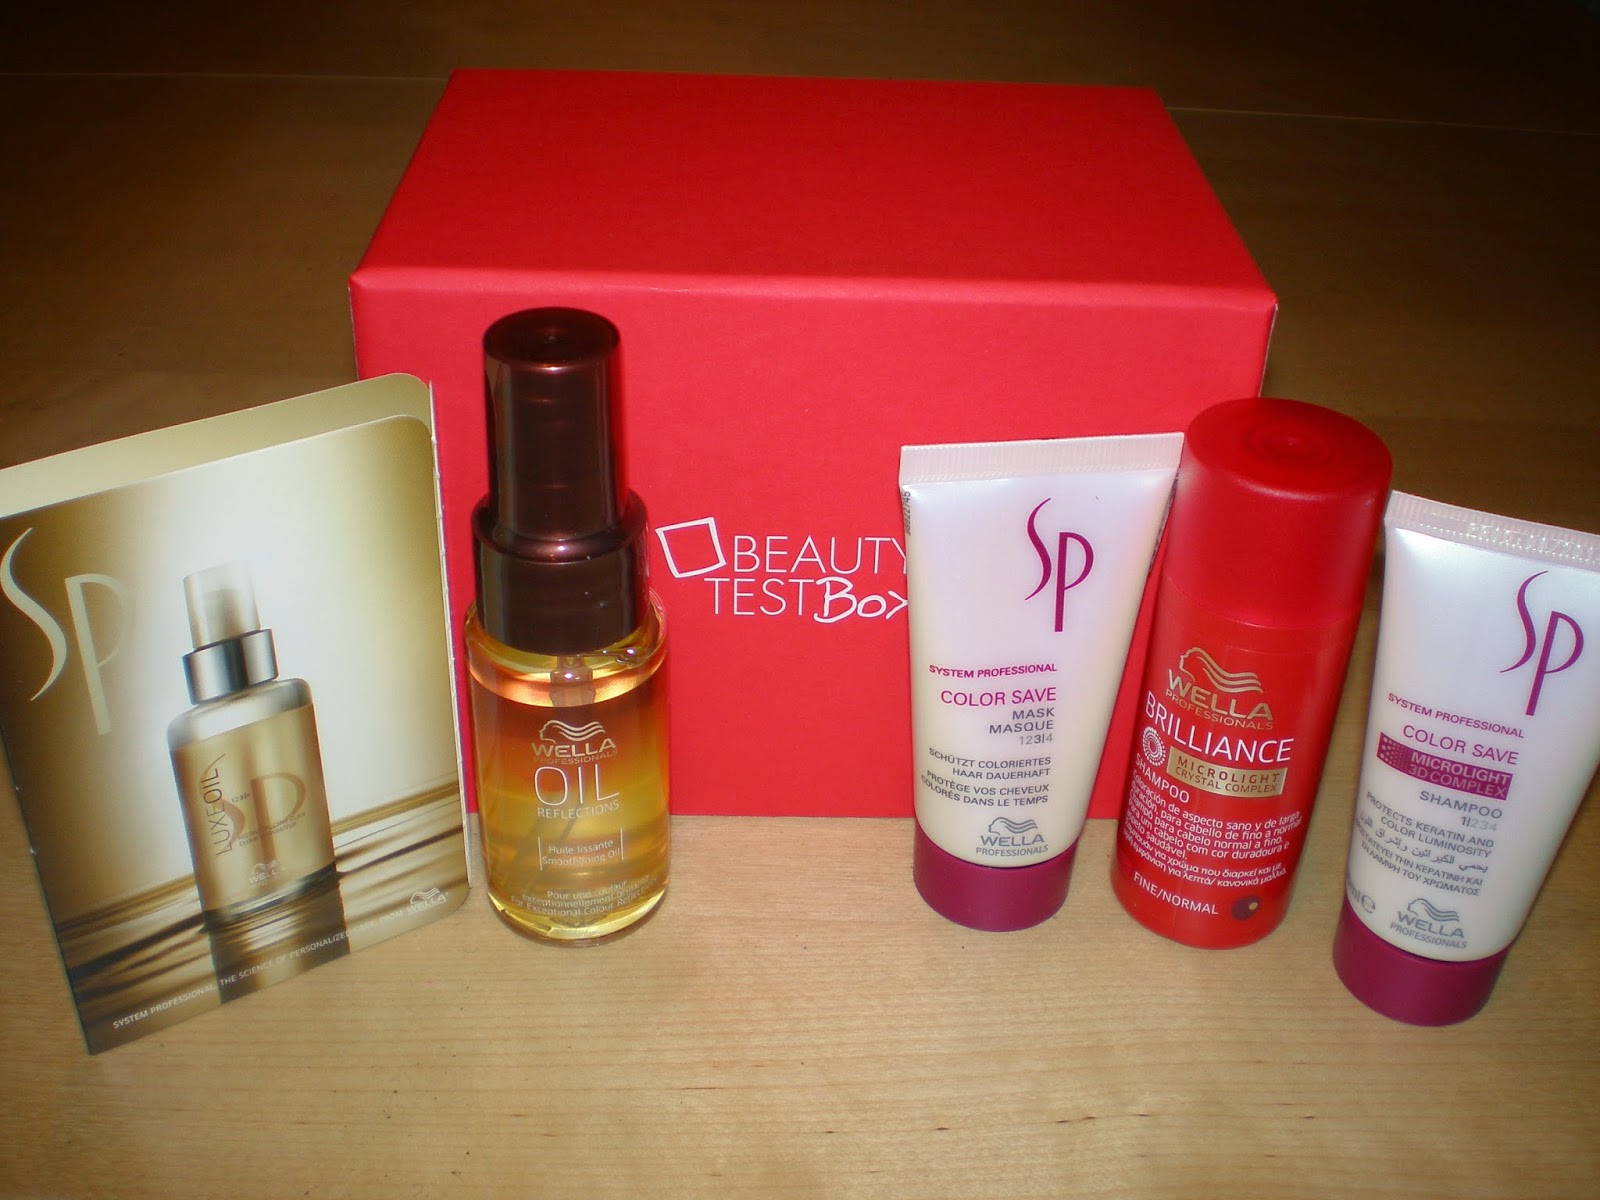 Unboxing January Beautytestbox - Teo&Wella special edition